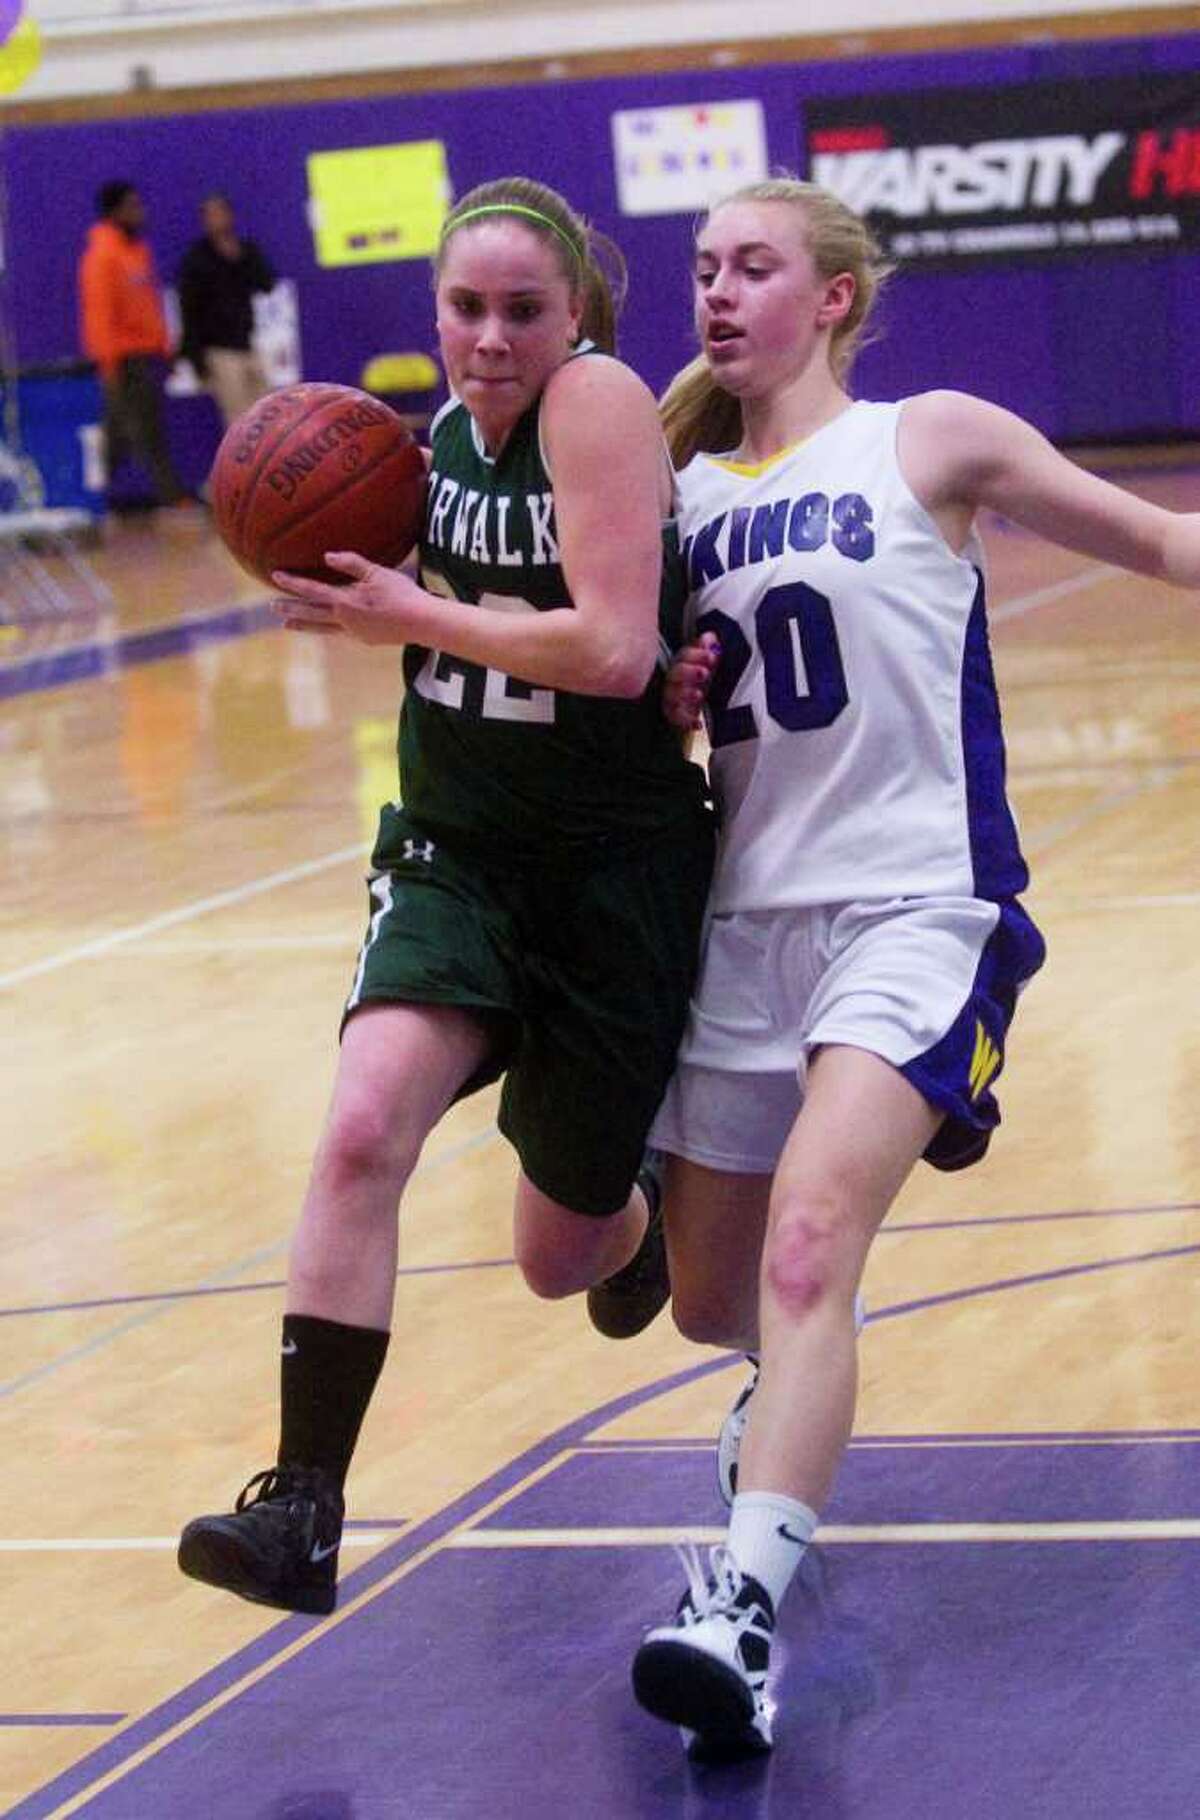 Norwalk's Katie Schmidt and Westhill's Stephanie Roones battlle as Westhill High School hosts Norwalk in a girls basketball game in Stamford, Conn., February 15, 2012.